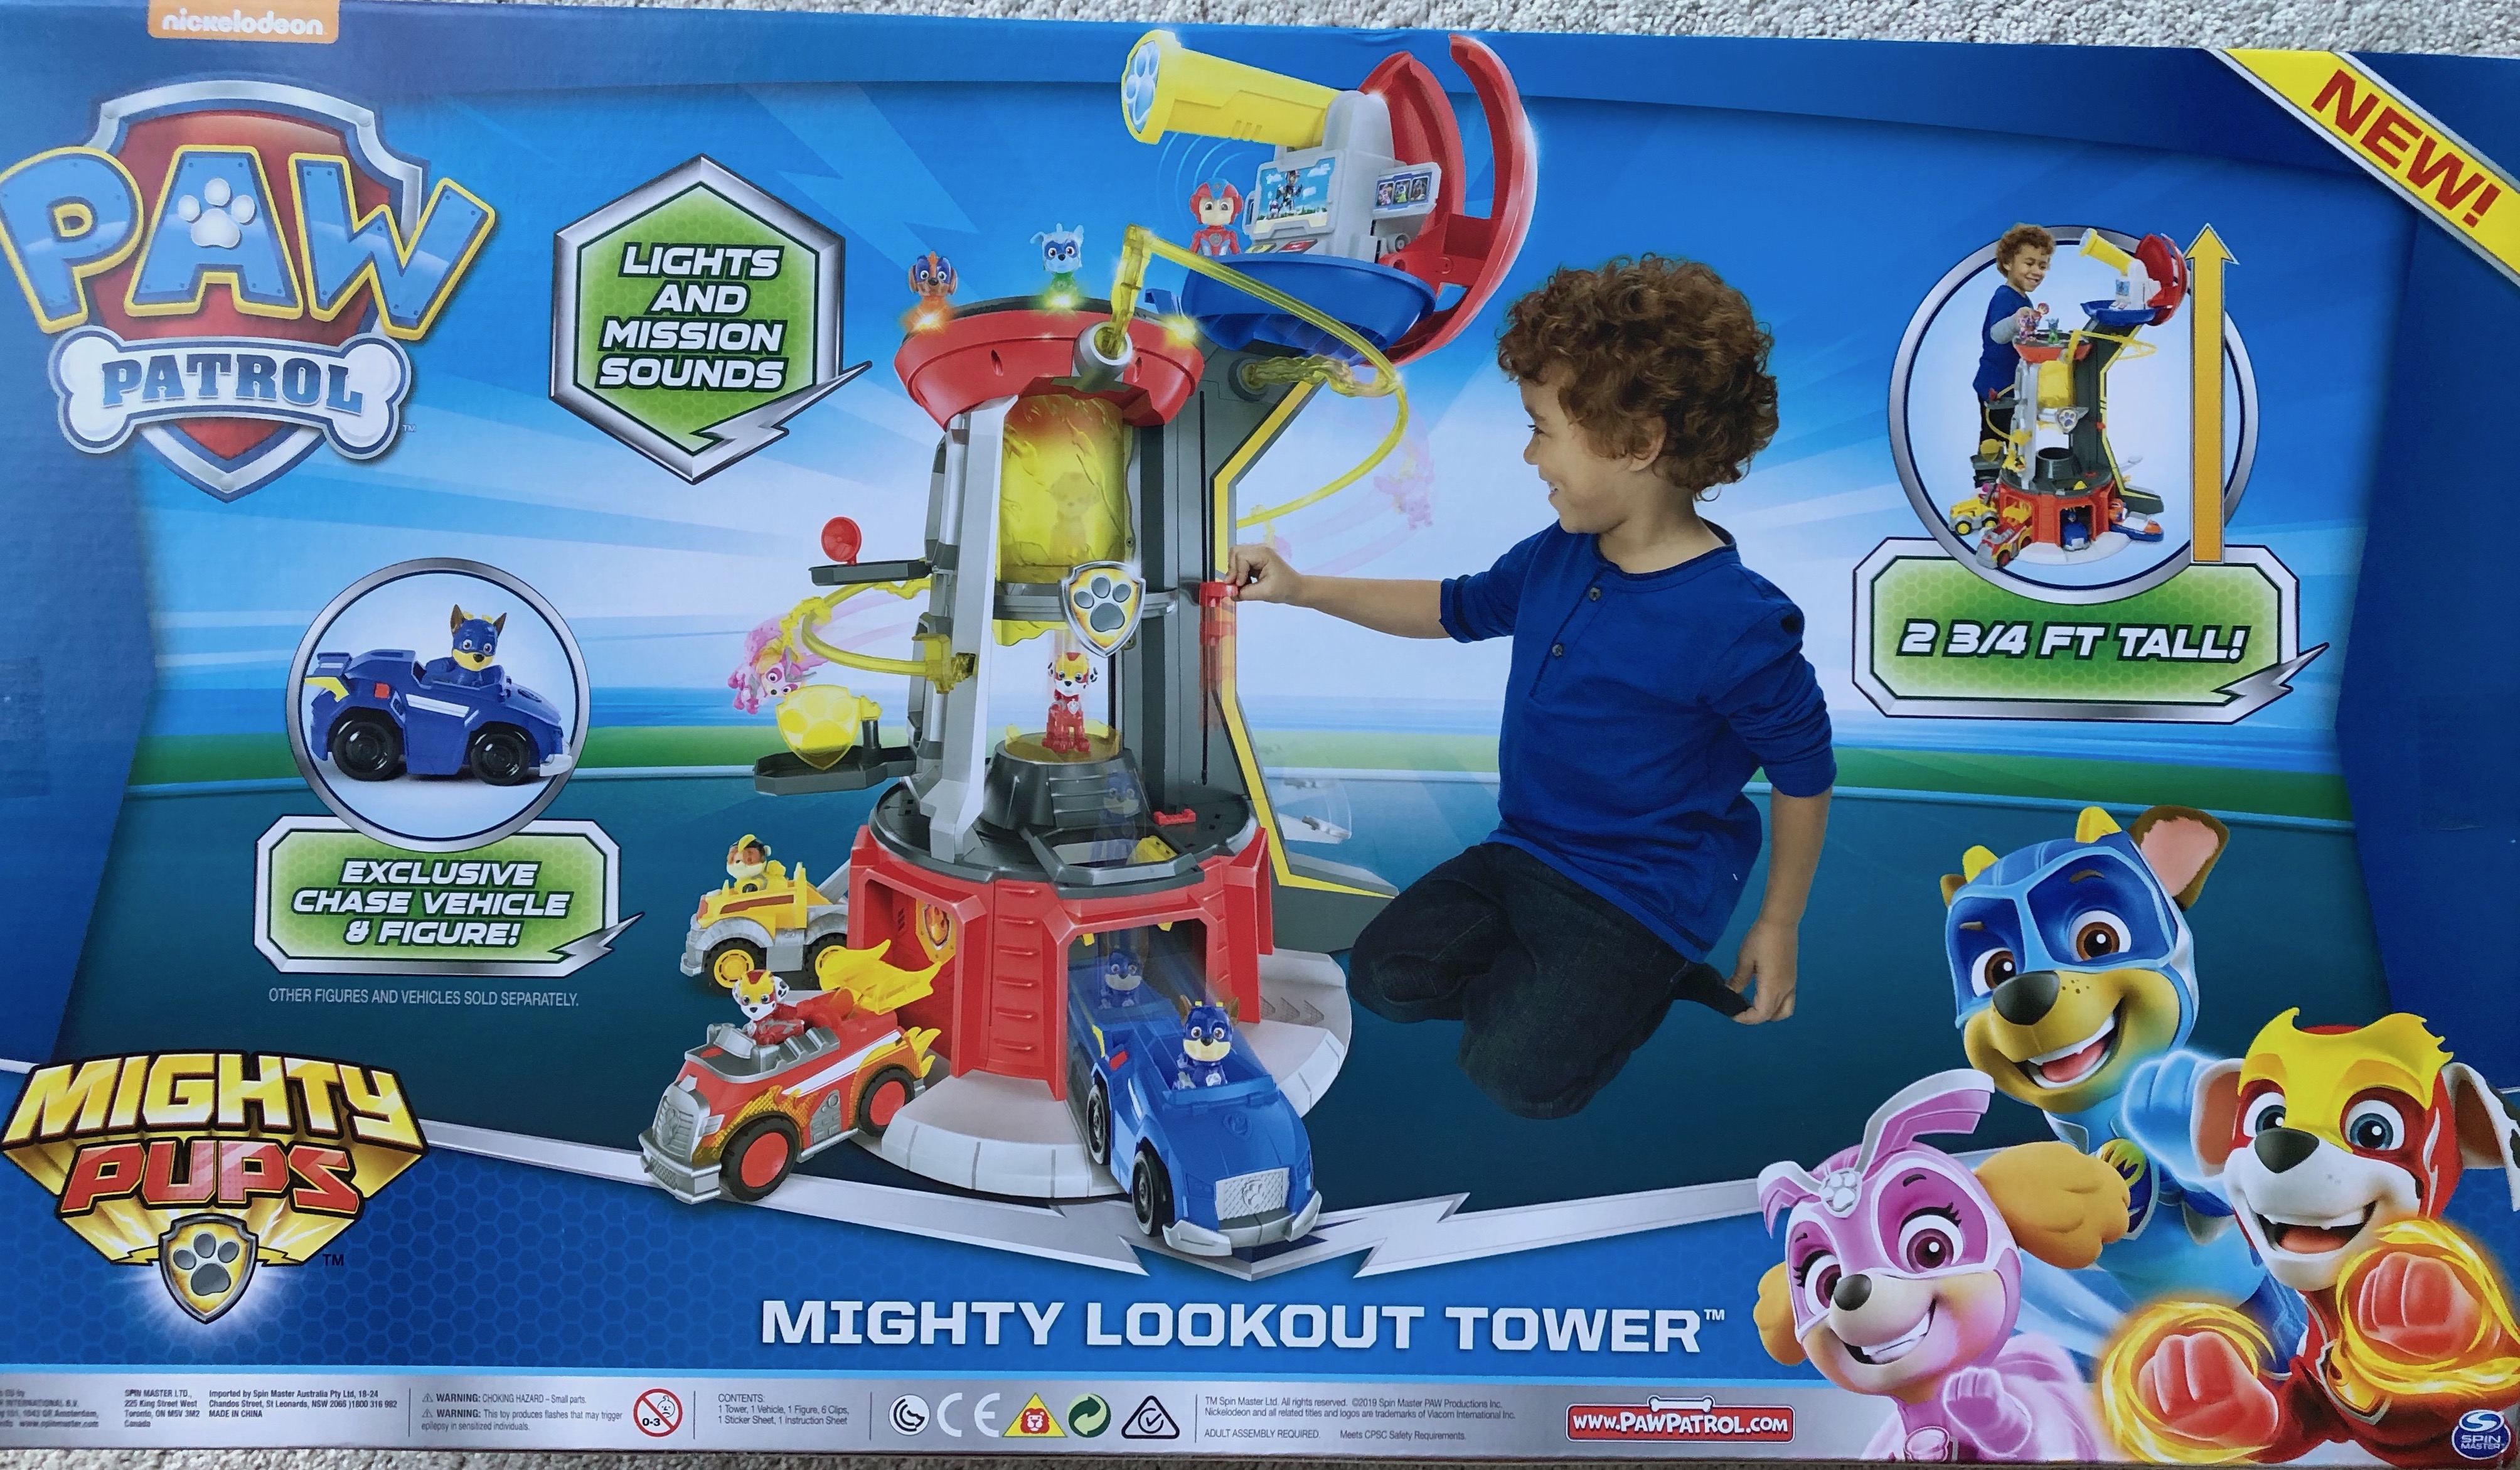 the lookout tower paw patrol